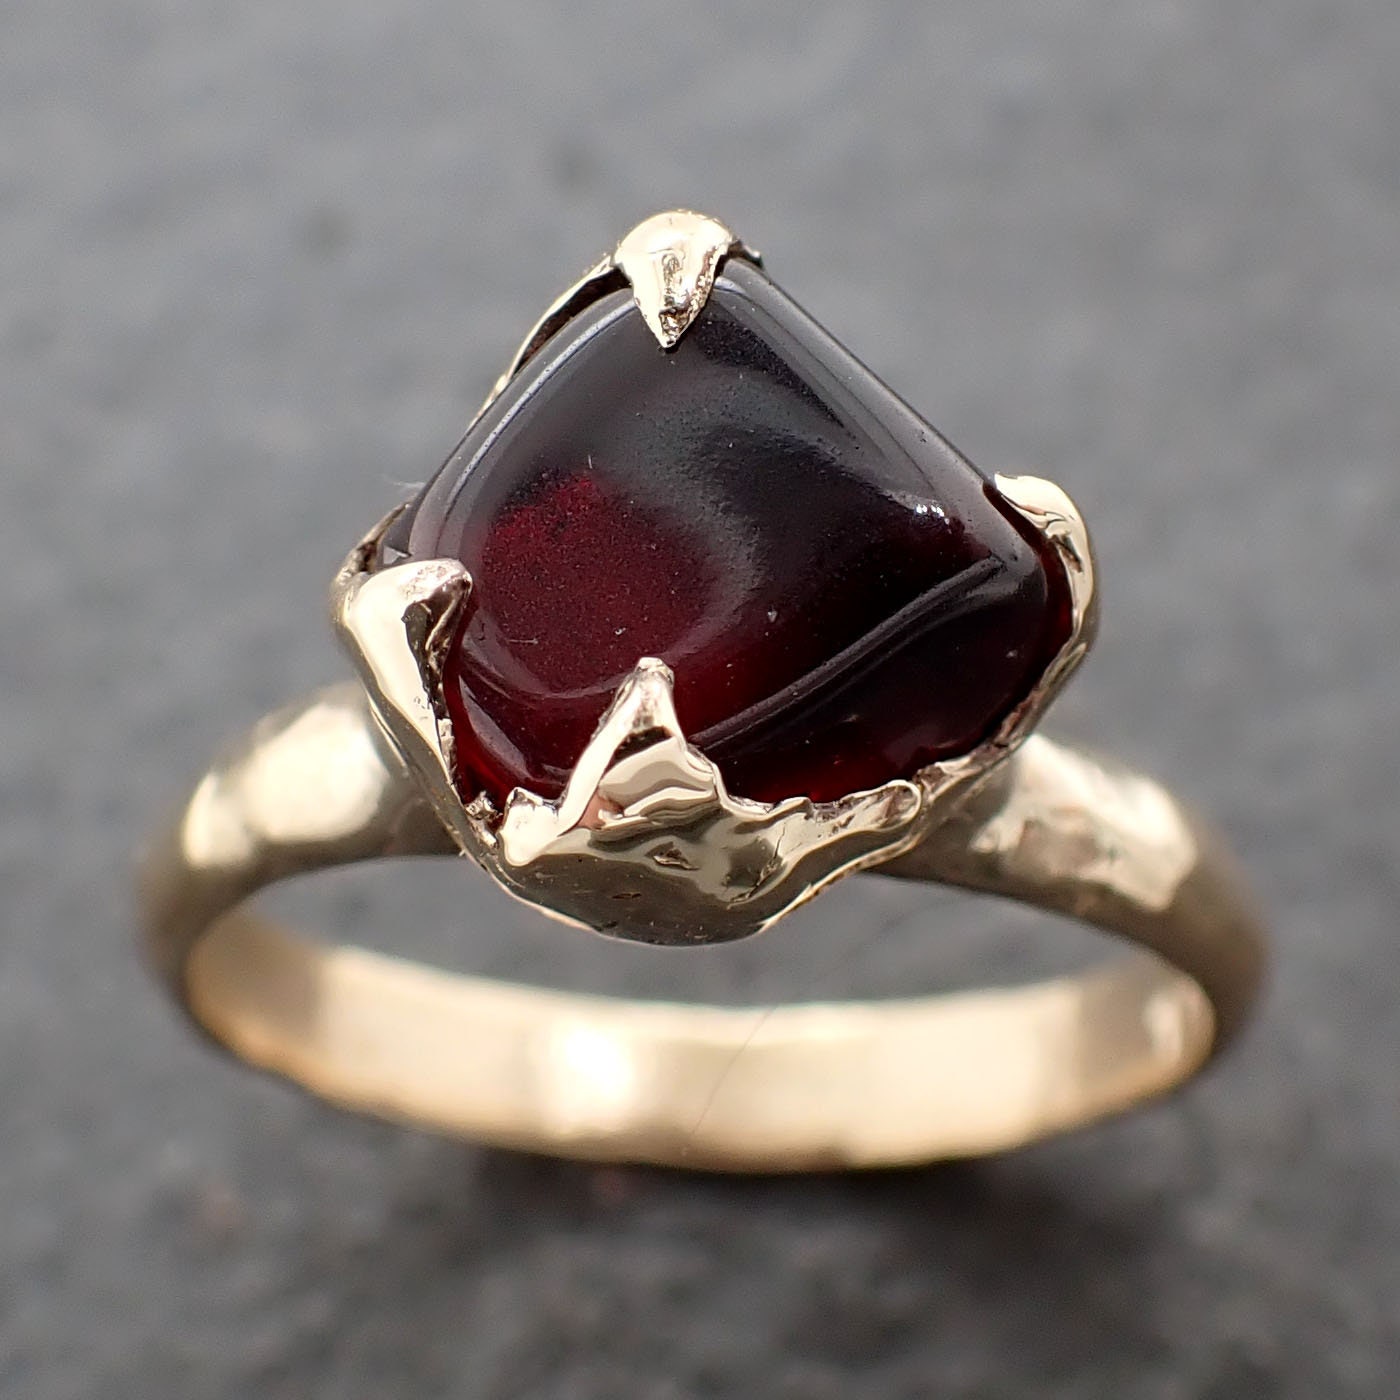 Garnet tumbled red wine 14k gold Solitaire gemstone ring 3180 – by Angeline